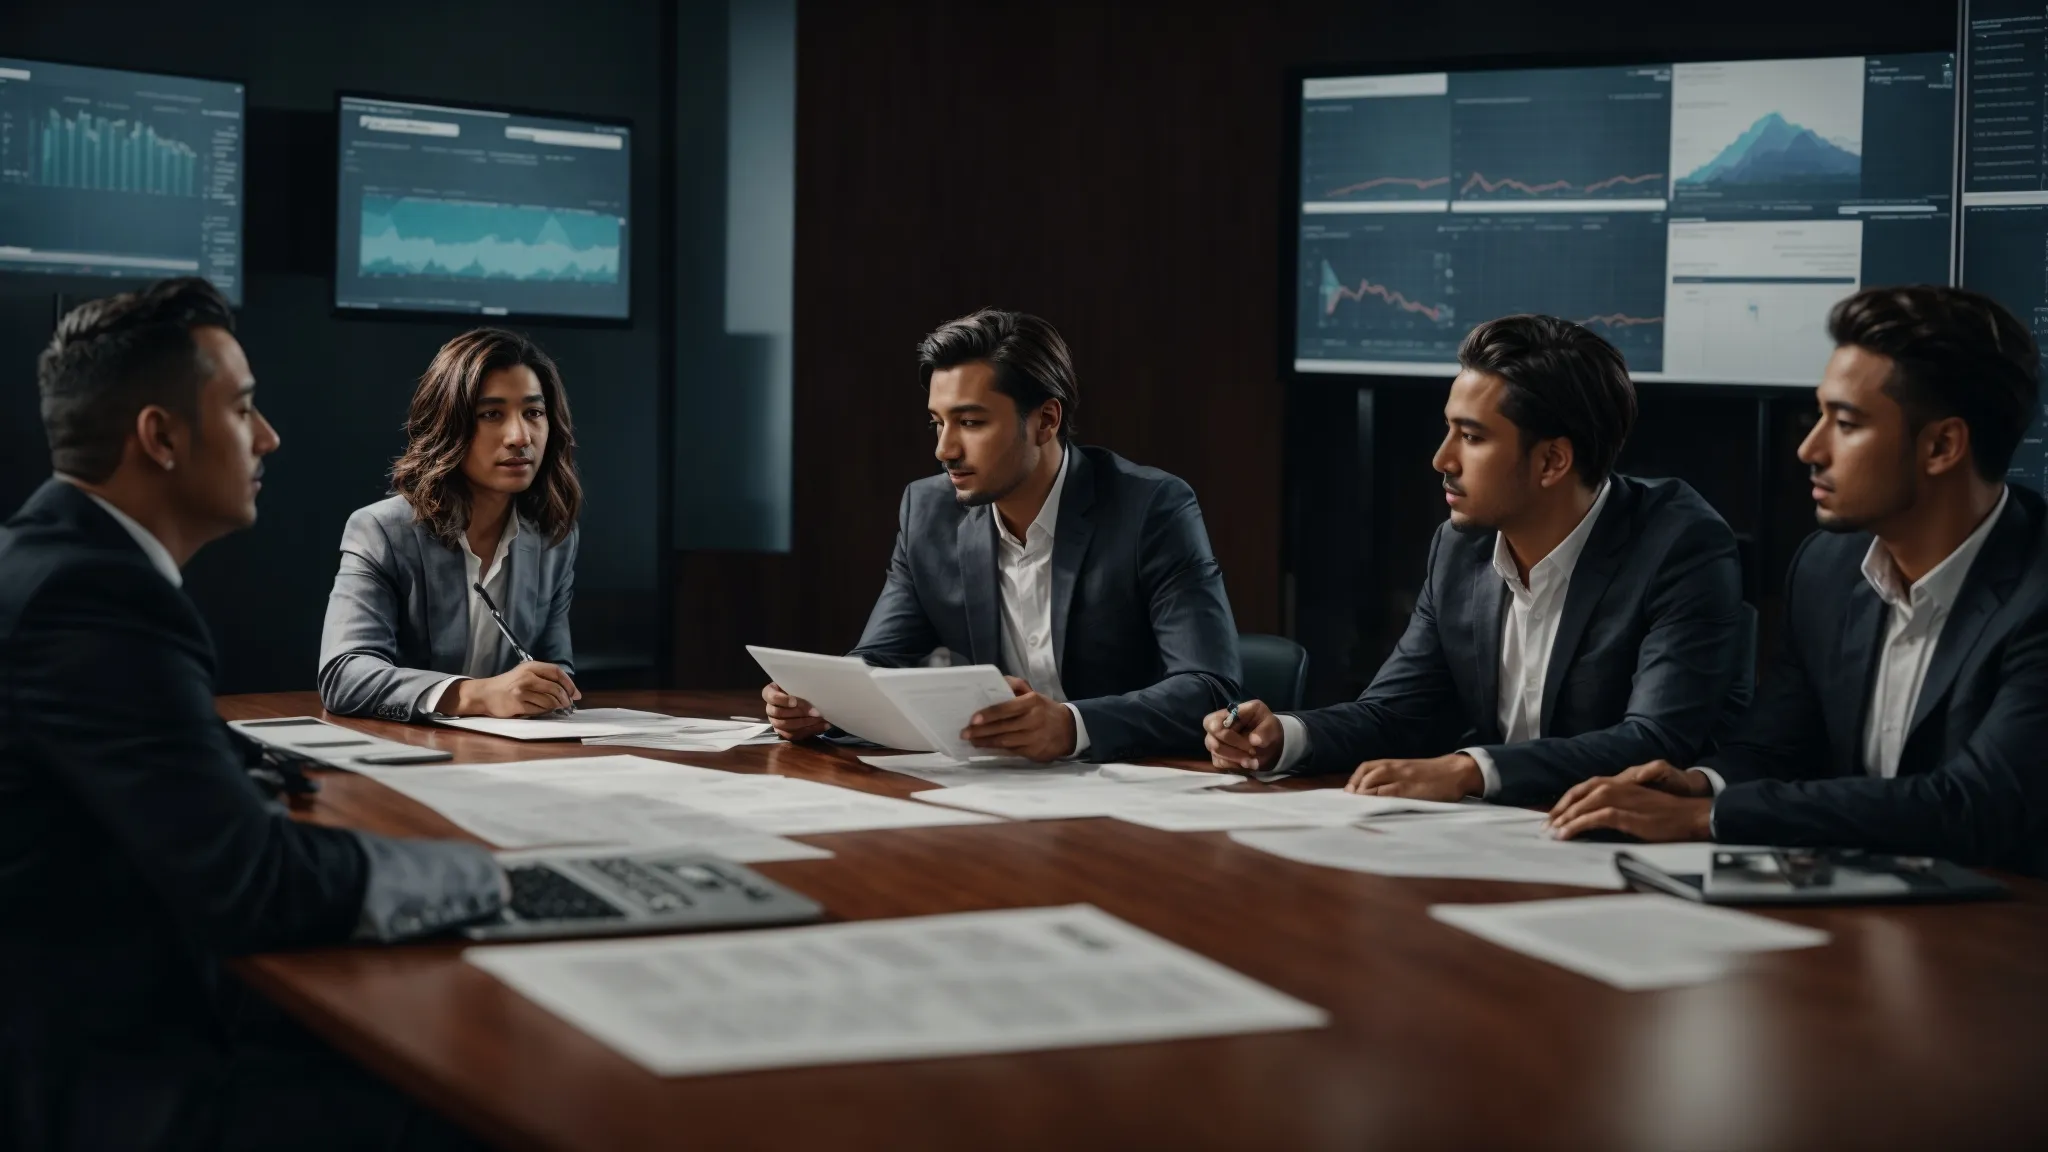 a group of professionals discussing strategies around a conference table with digital marketing charts projected on a screen.